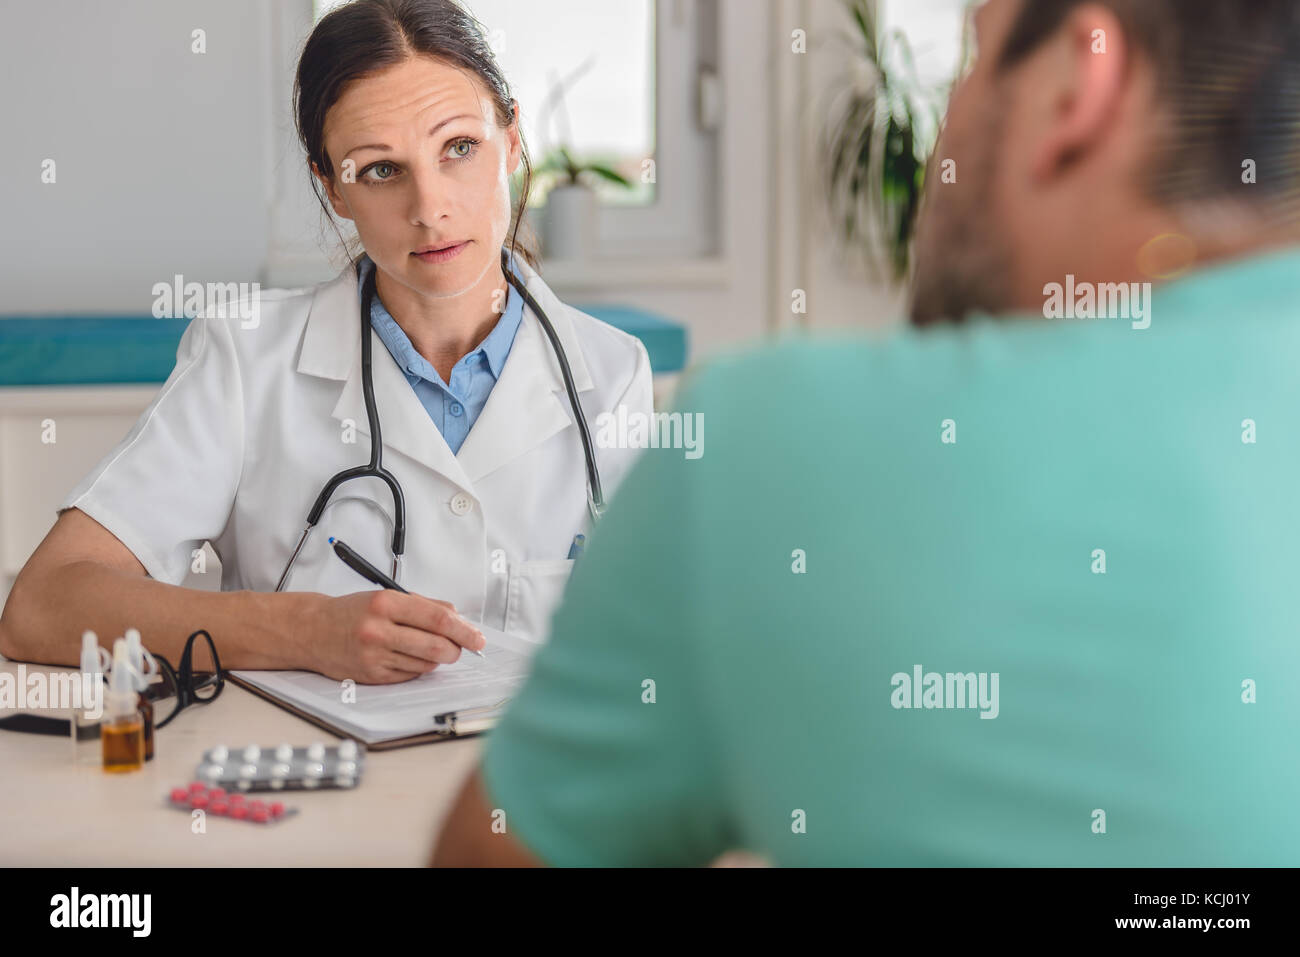 Doctor writing a prescription to patient Stock Photo